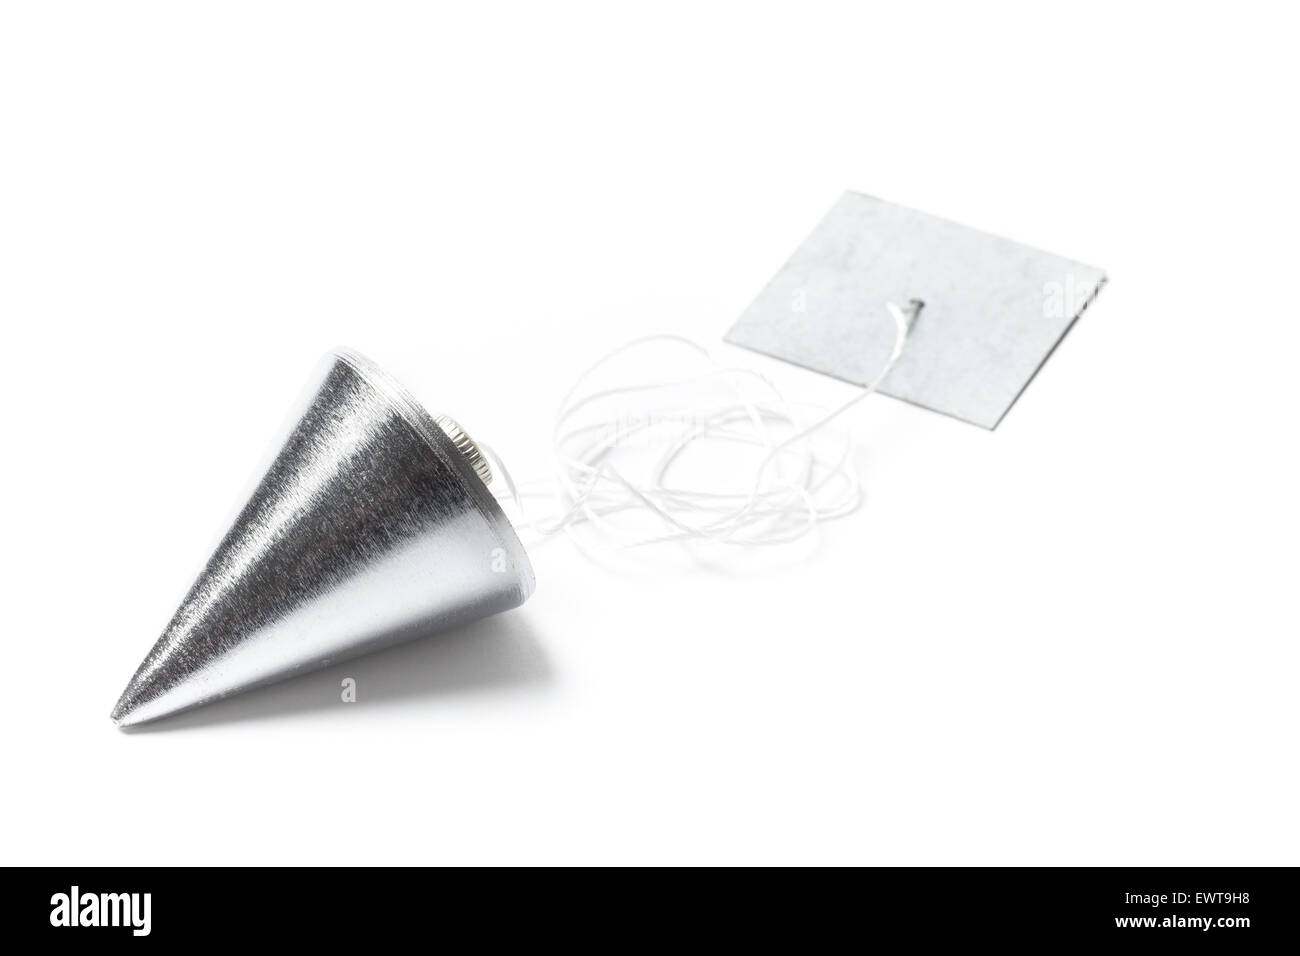 Metal plummet in the form of a cone white cord and plank. The objects are laid on the table and isolated on white. Stock Photo